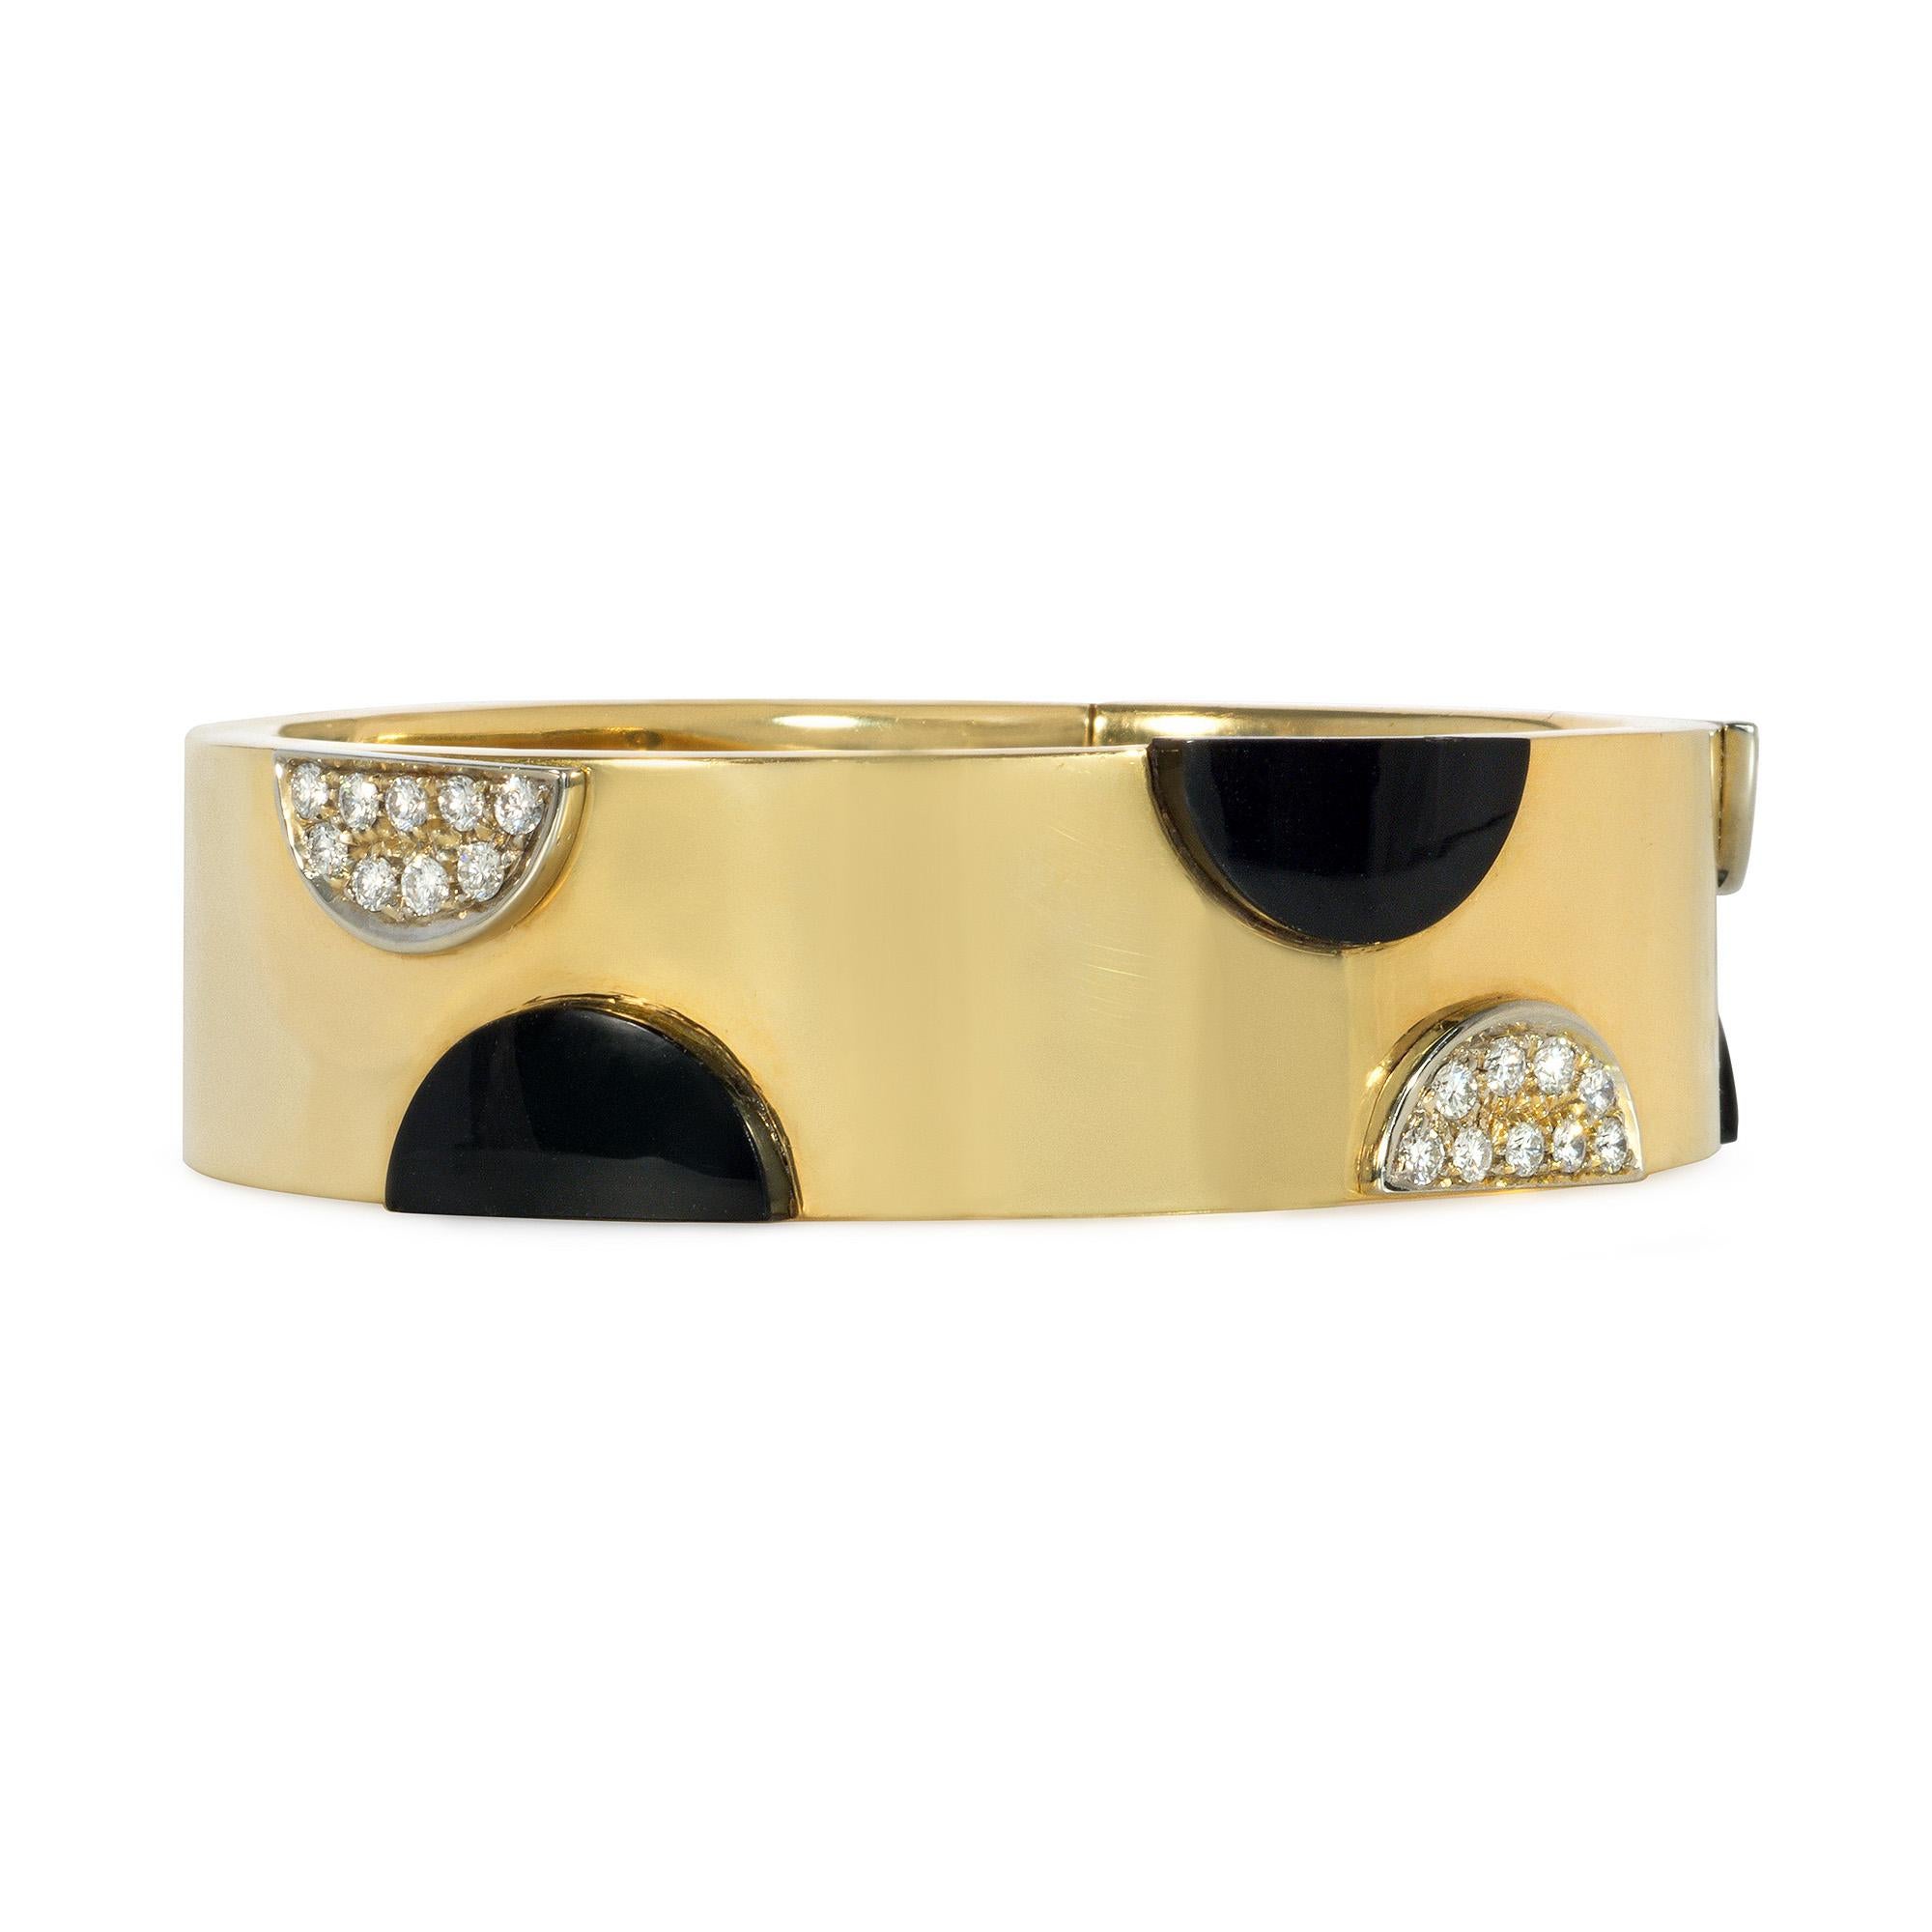 A hinged gold cuff bracelet decorated with applied half-moon onyx and pavé diamond plaques, in 18k.  Italy.  Atw 0.90 ct.  Inner circumference approximately 7.5 inches